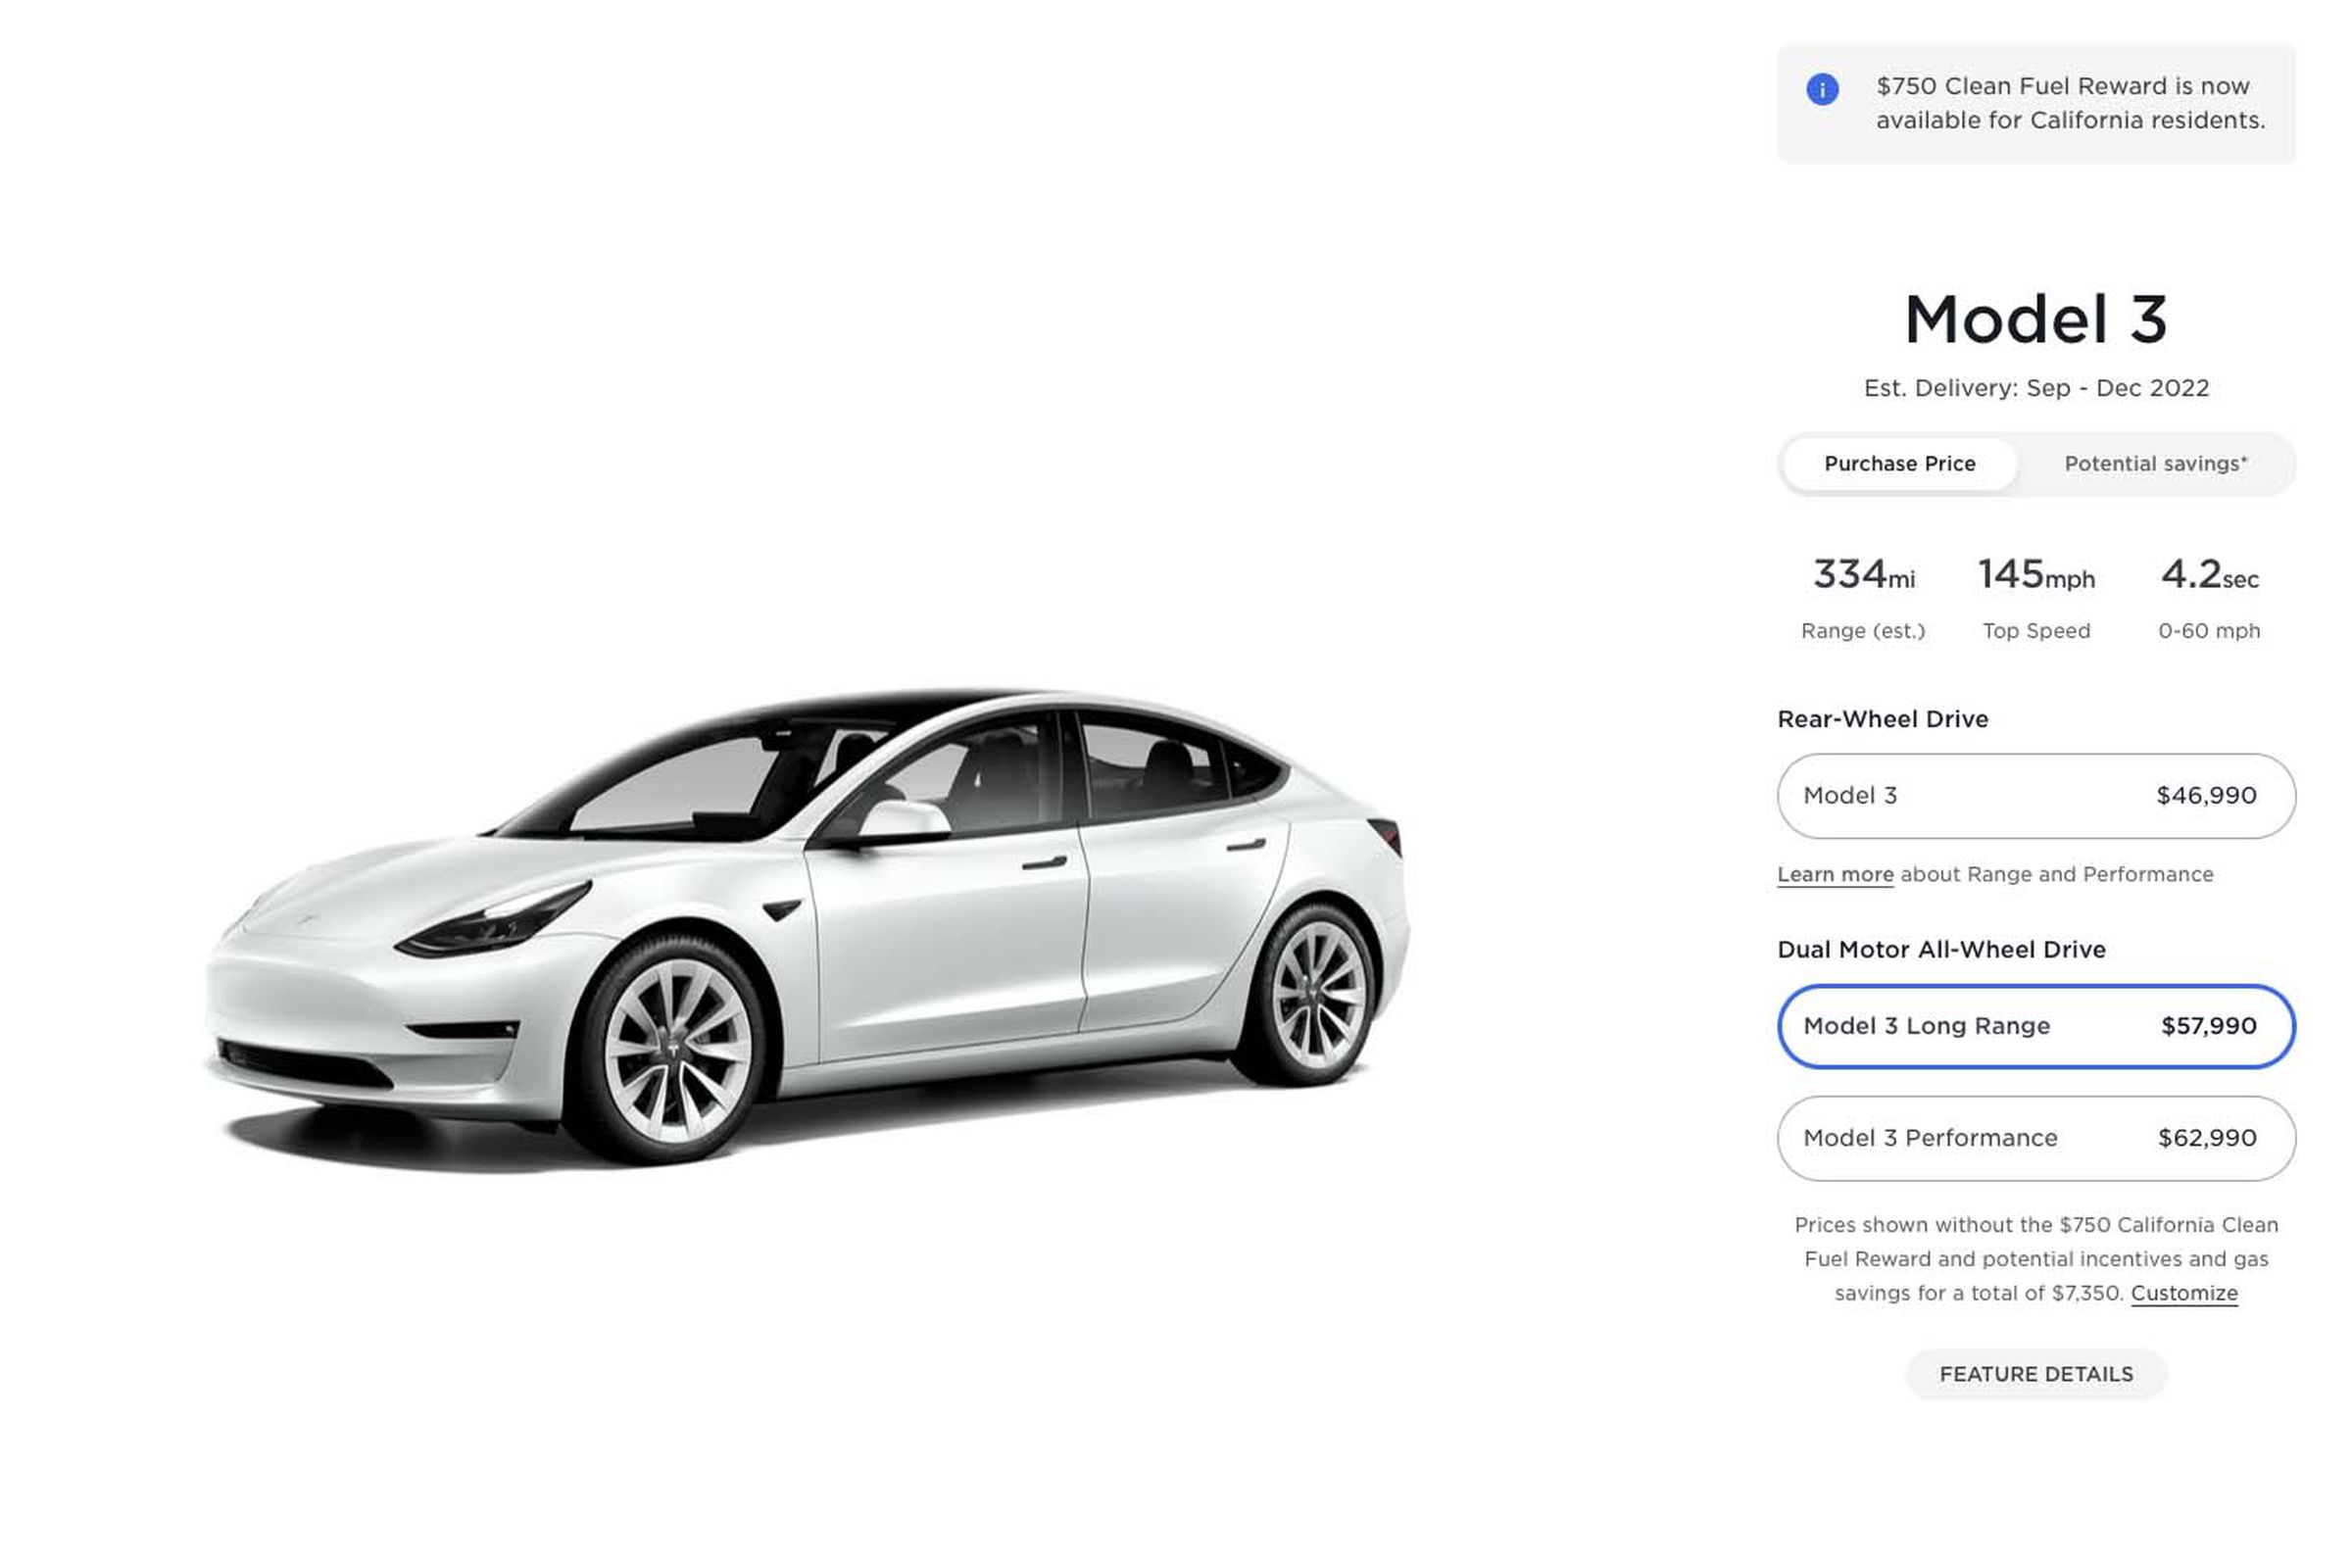 The Long Range version of the Model 3 now costs $57,990.